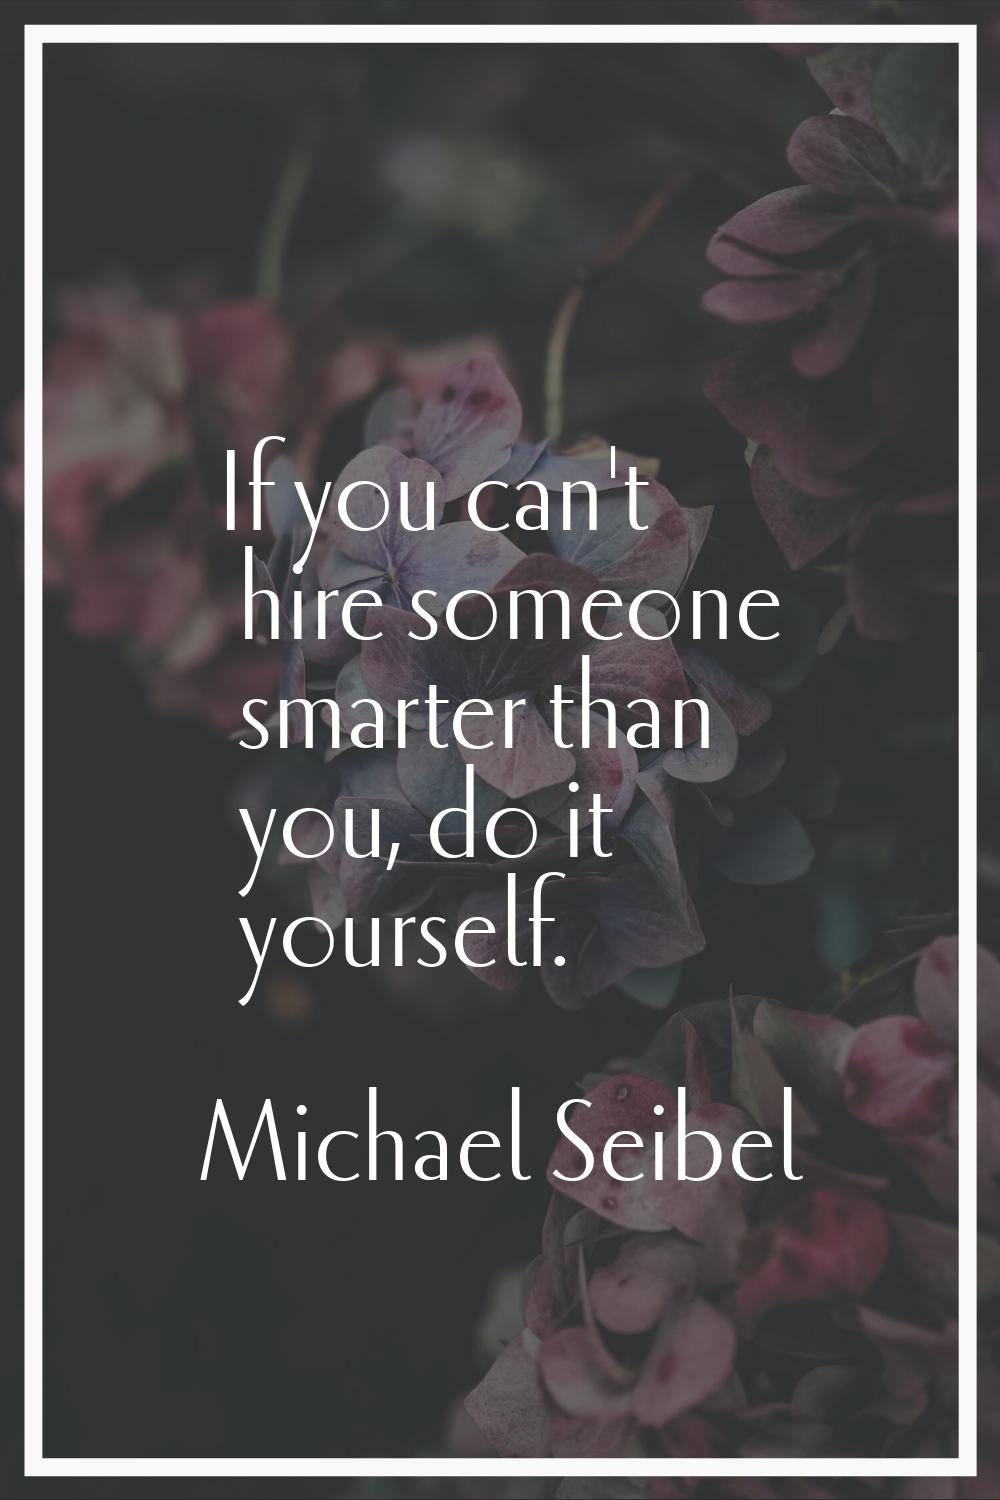 If you can't hire someone smarter than you, do it yourself.